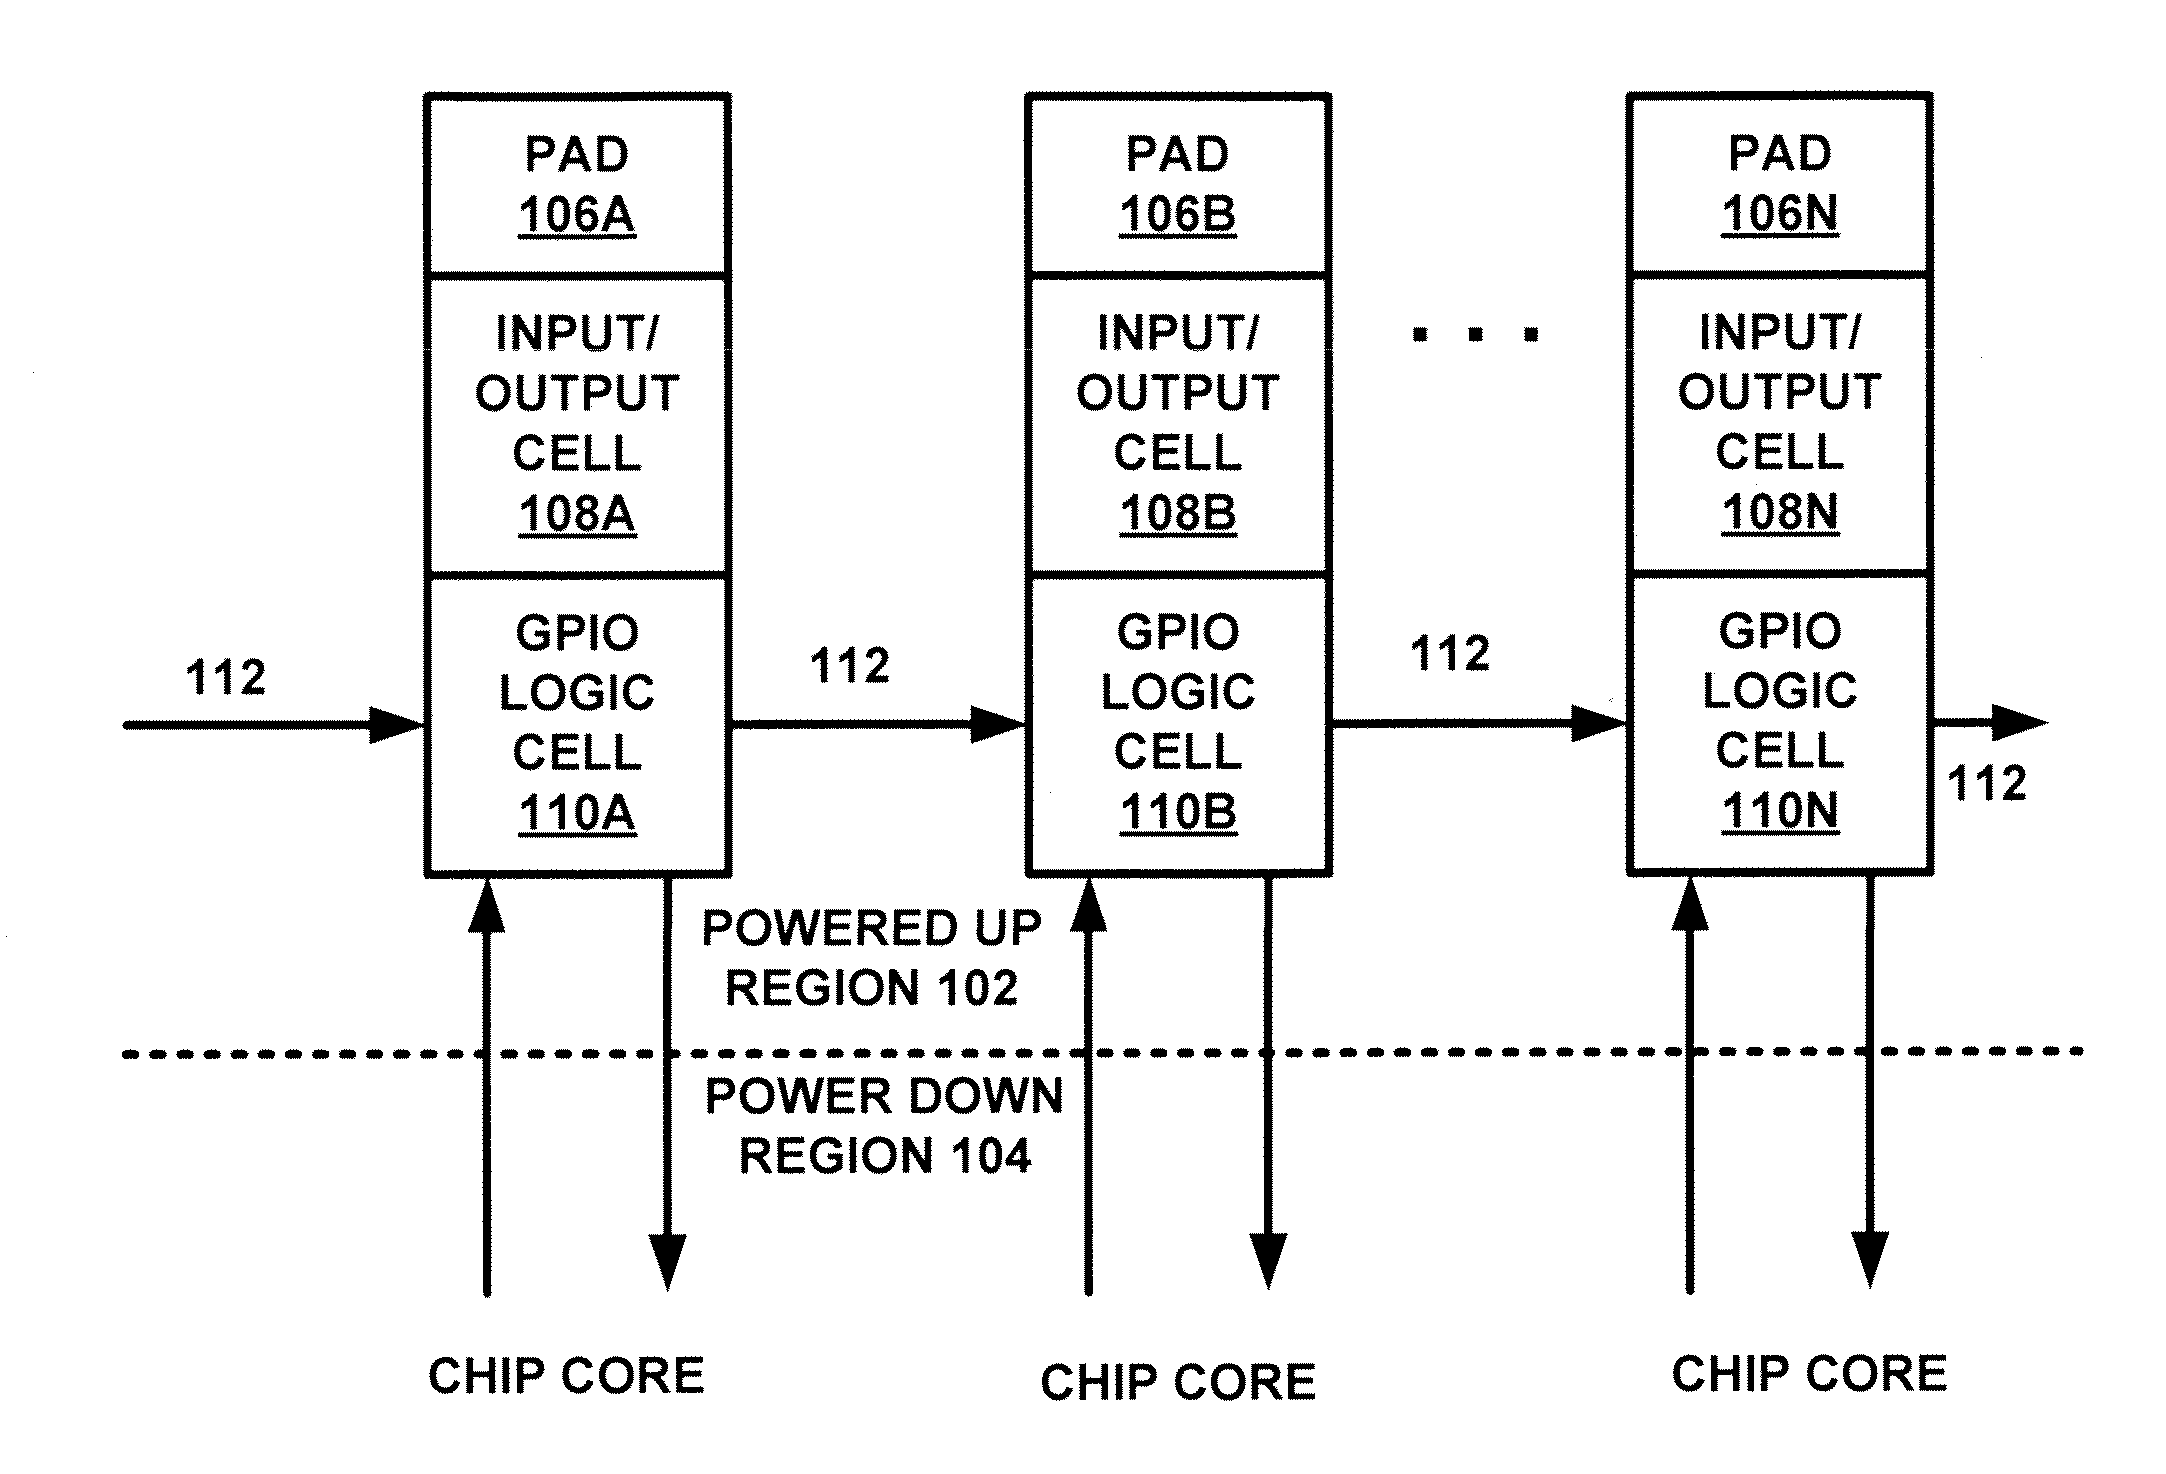 Method and system for waking on inuput/output interrupts while powered down